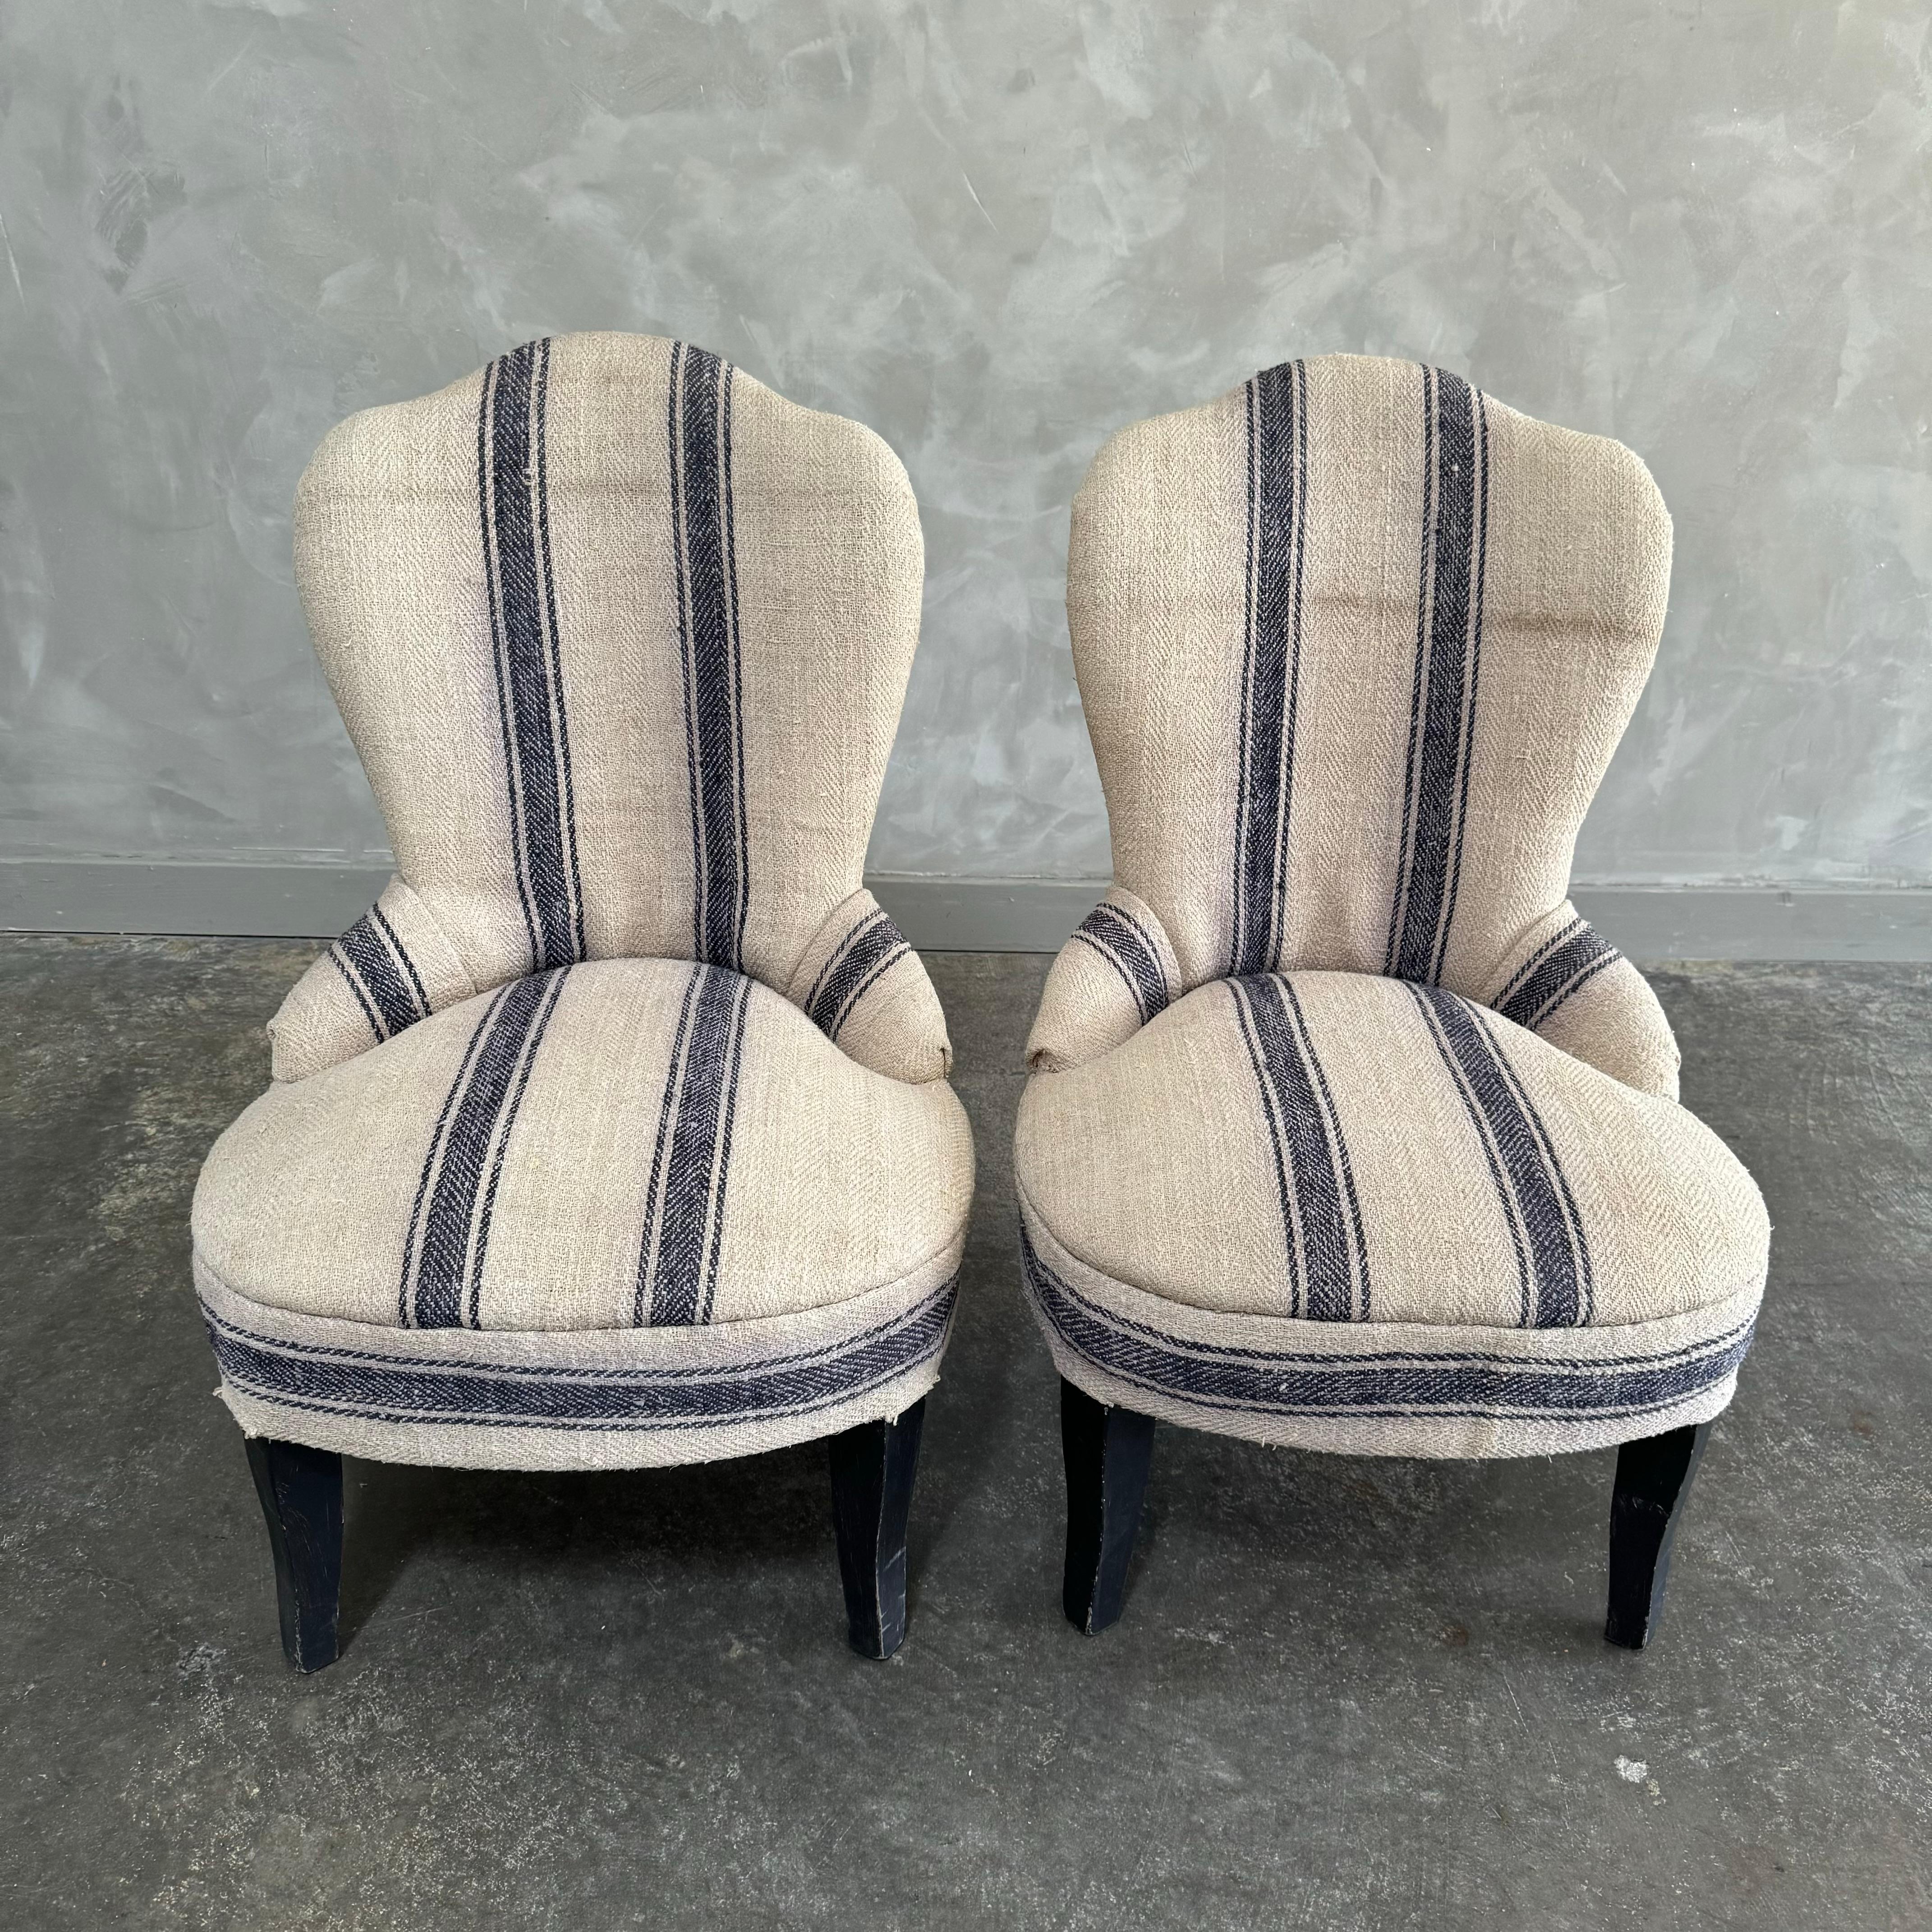 Pair of vintage petite chairs, great for a kids room. Nailhead trim and thick vintage stripe linen make these simple chairs a great choice to add a vintage charm to any room.
Dimensions: 19